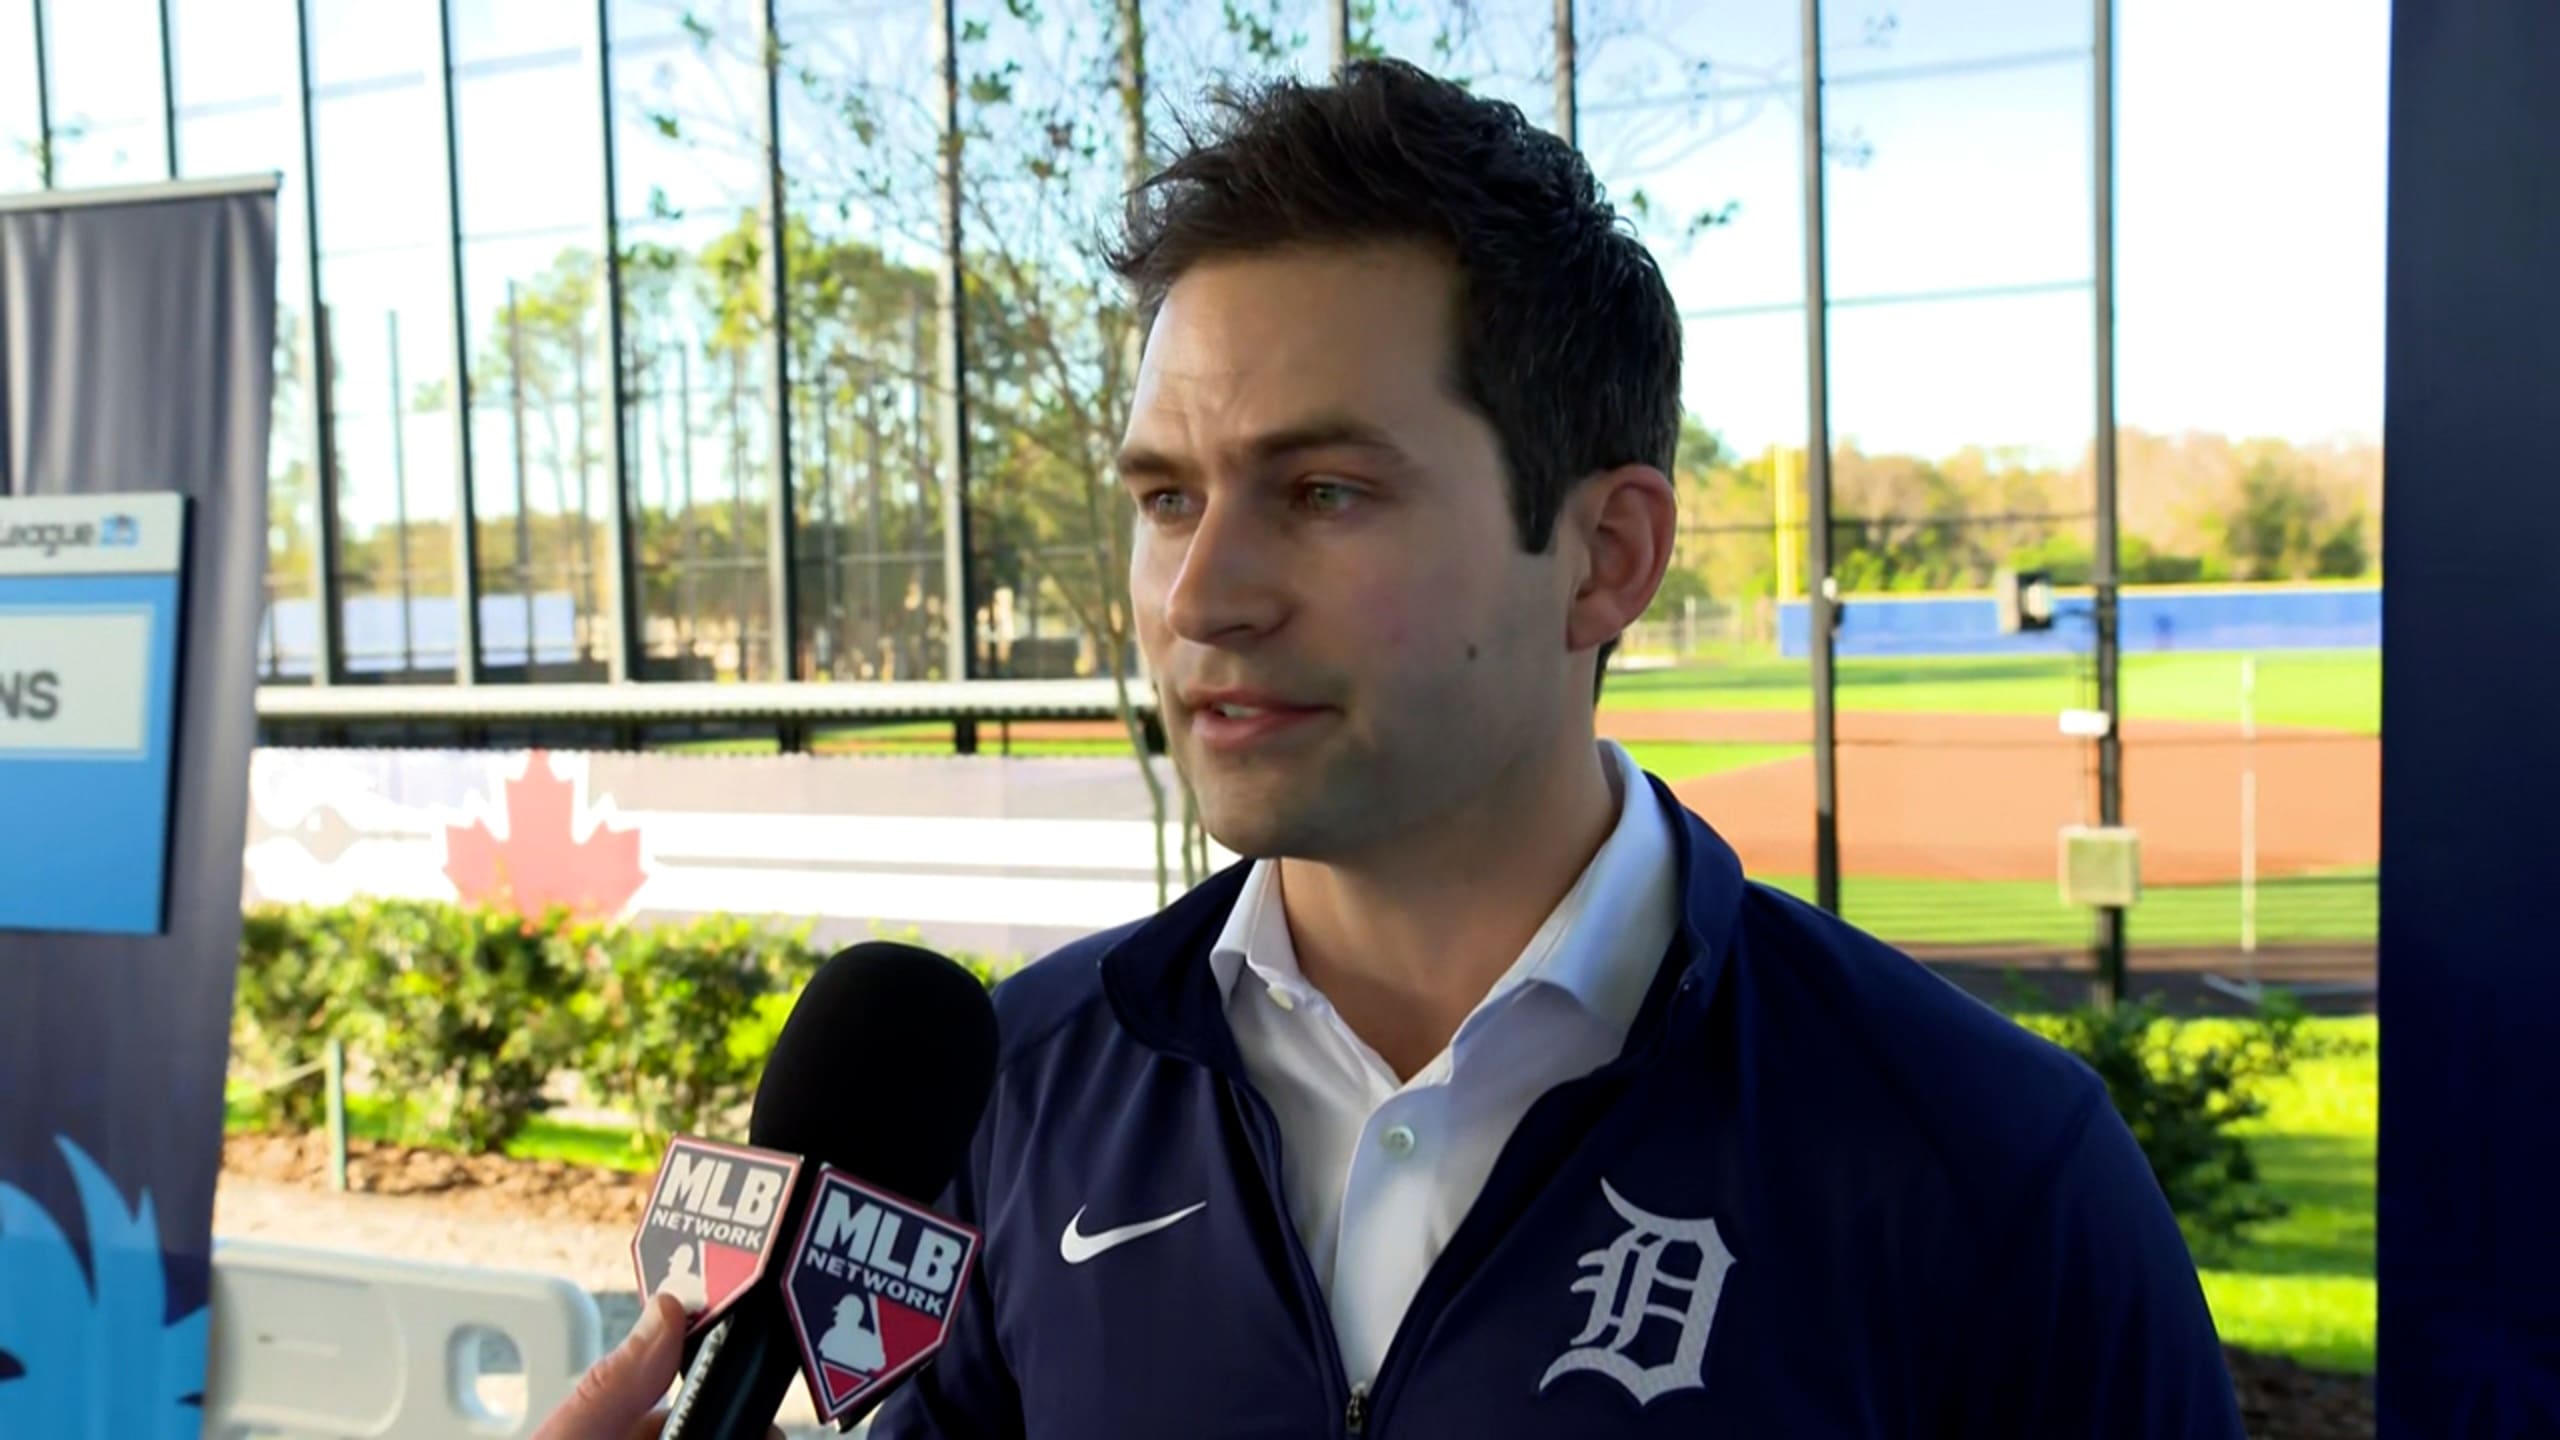 Tigers news, notes and links from the first week of spring training camp -  Bless You Boys